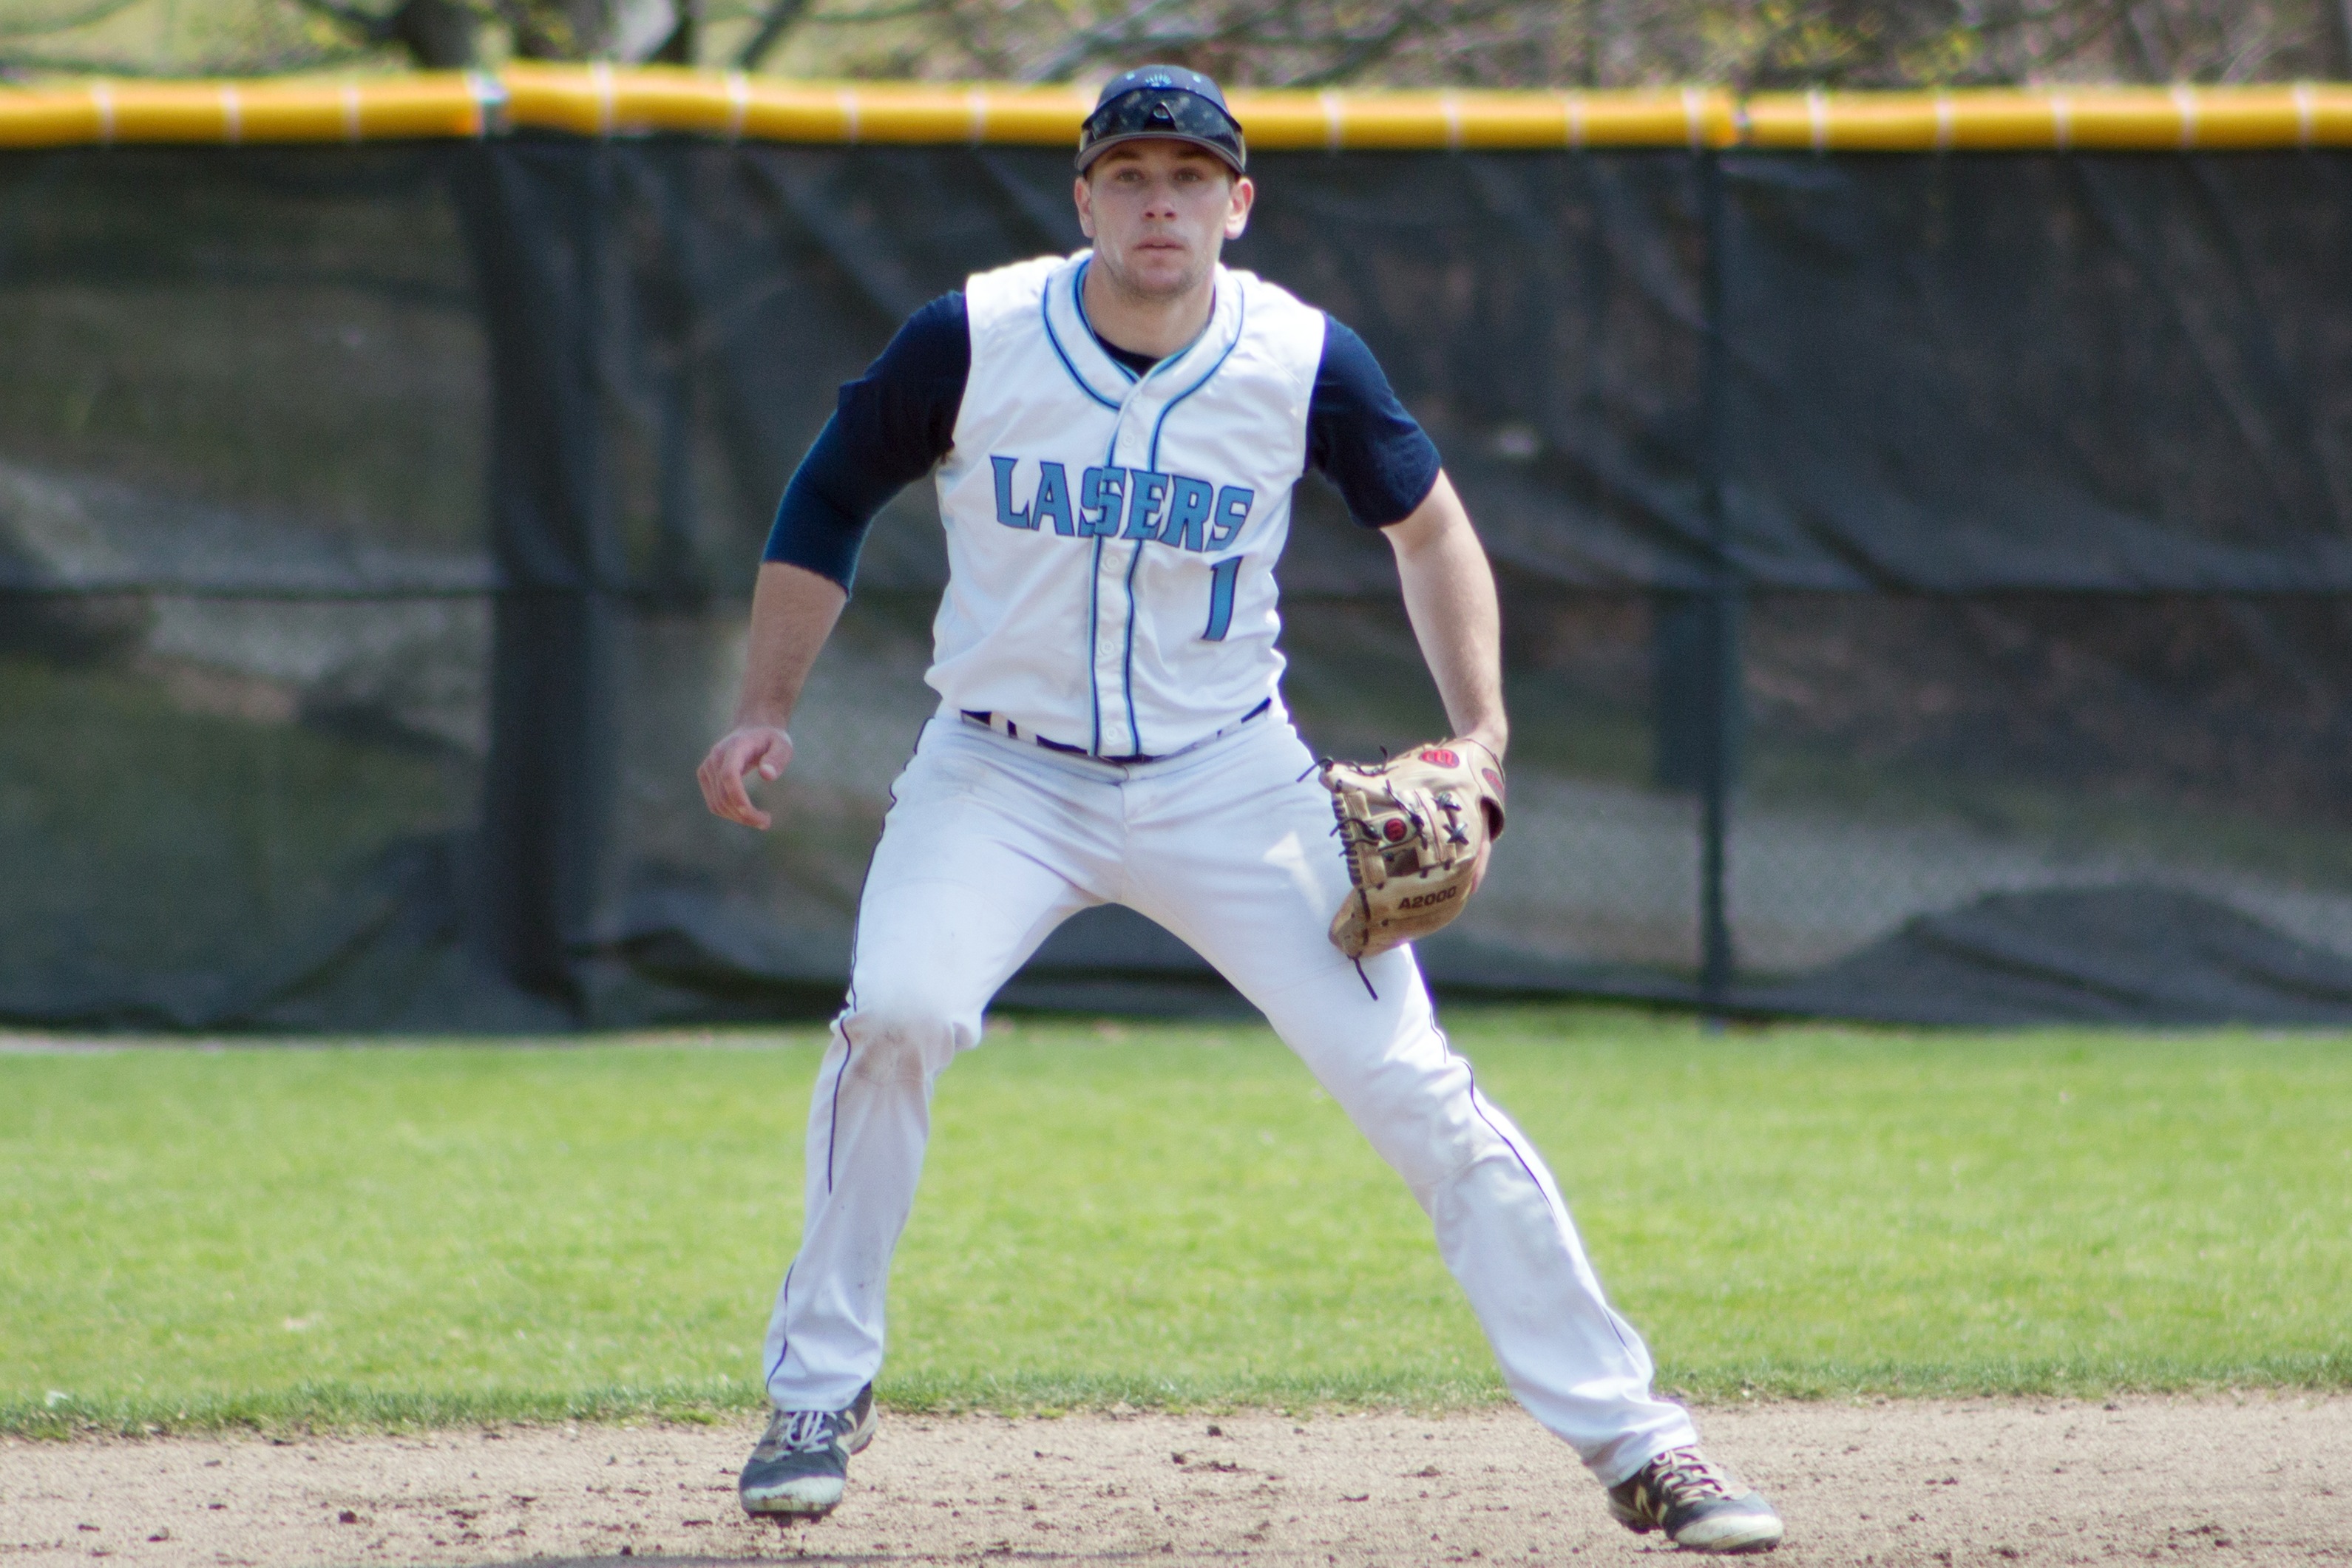 Suffolk pulls out win over Lasell in GNAC Baseball Tournament